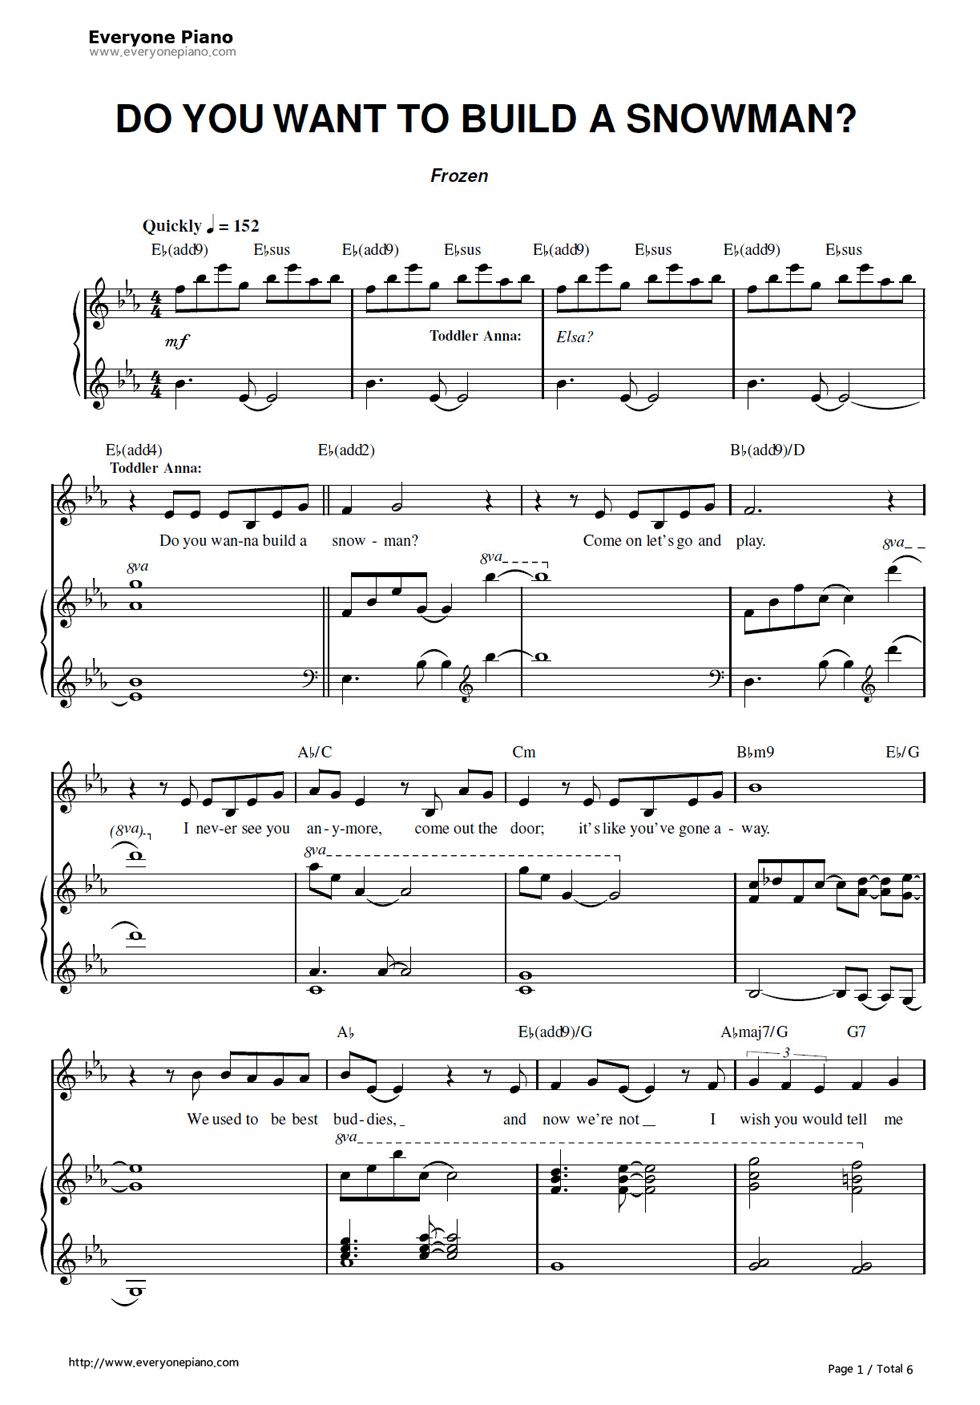 Free Do You Want To Build A Snowman-Frozen Ost Sheet Music Preview 1 - Let It Go Violin Sheet Music Free Printable